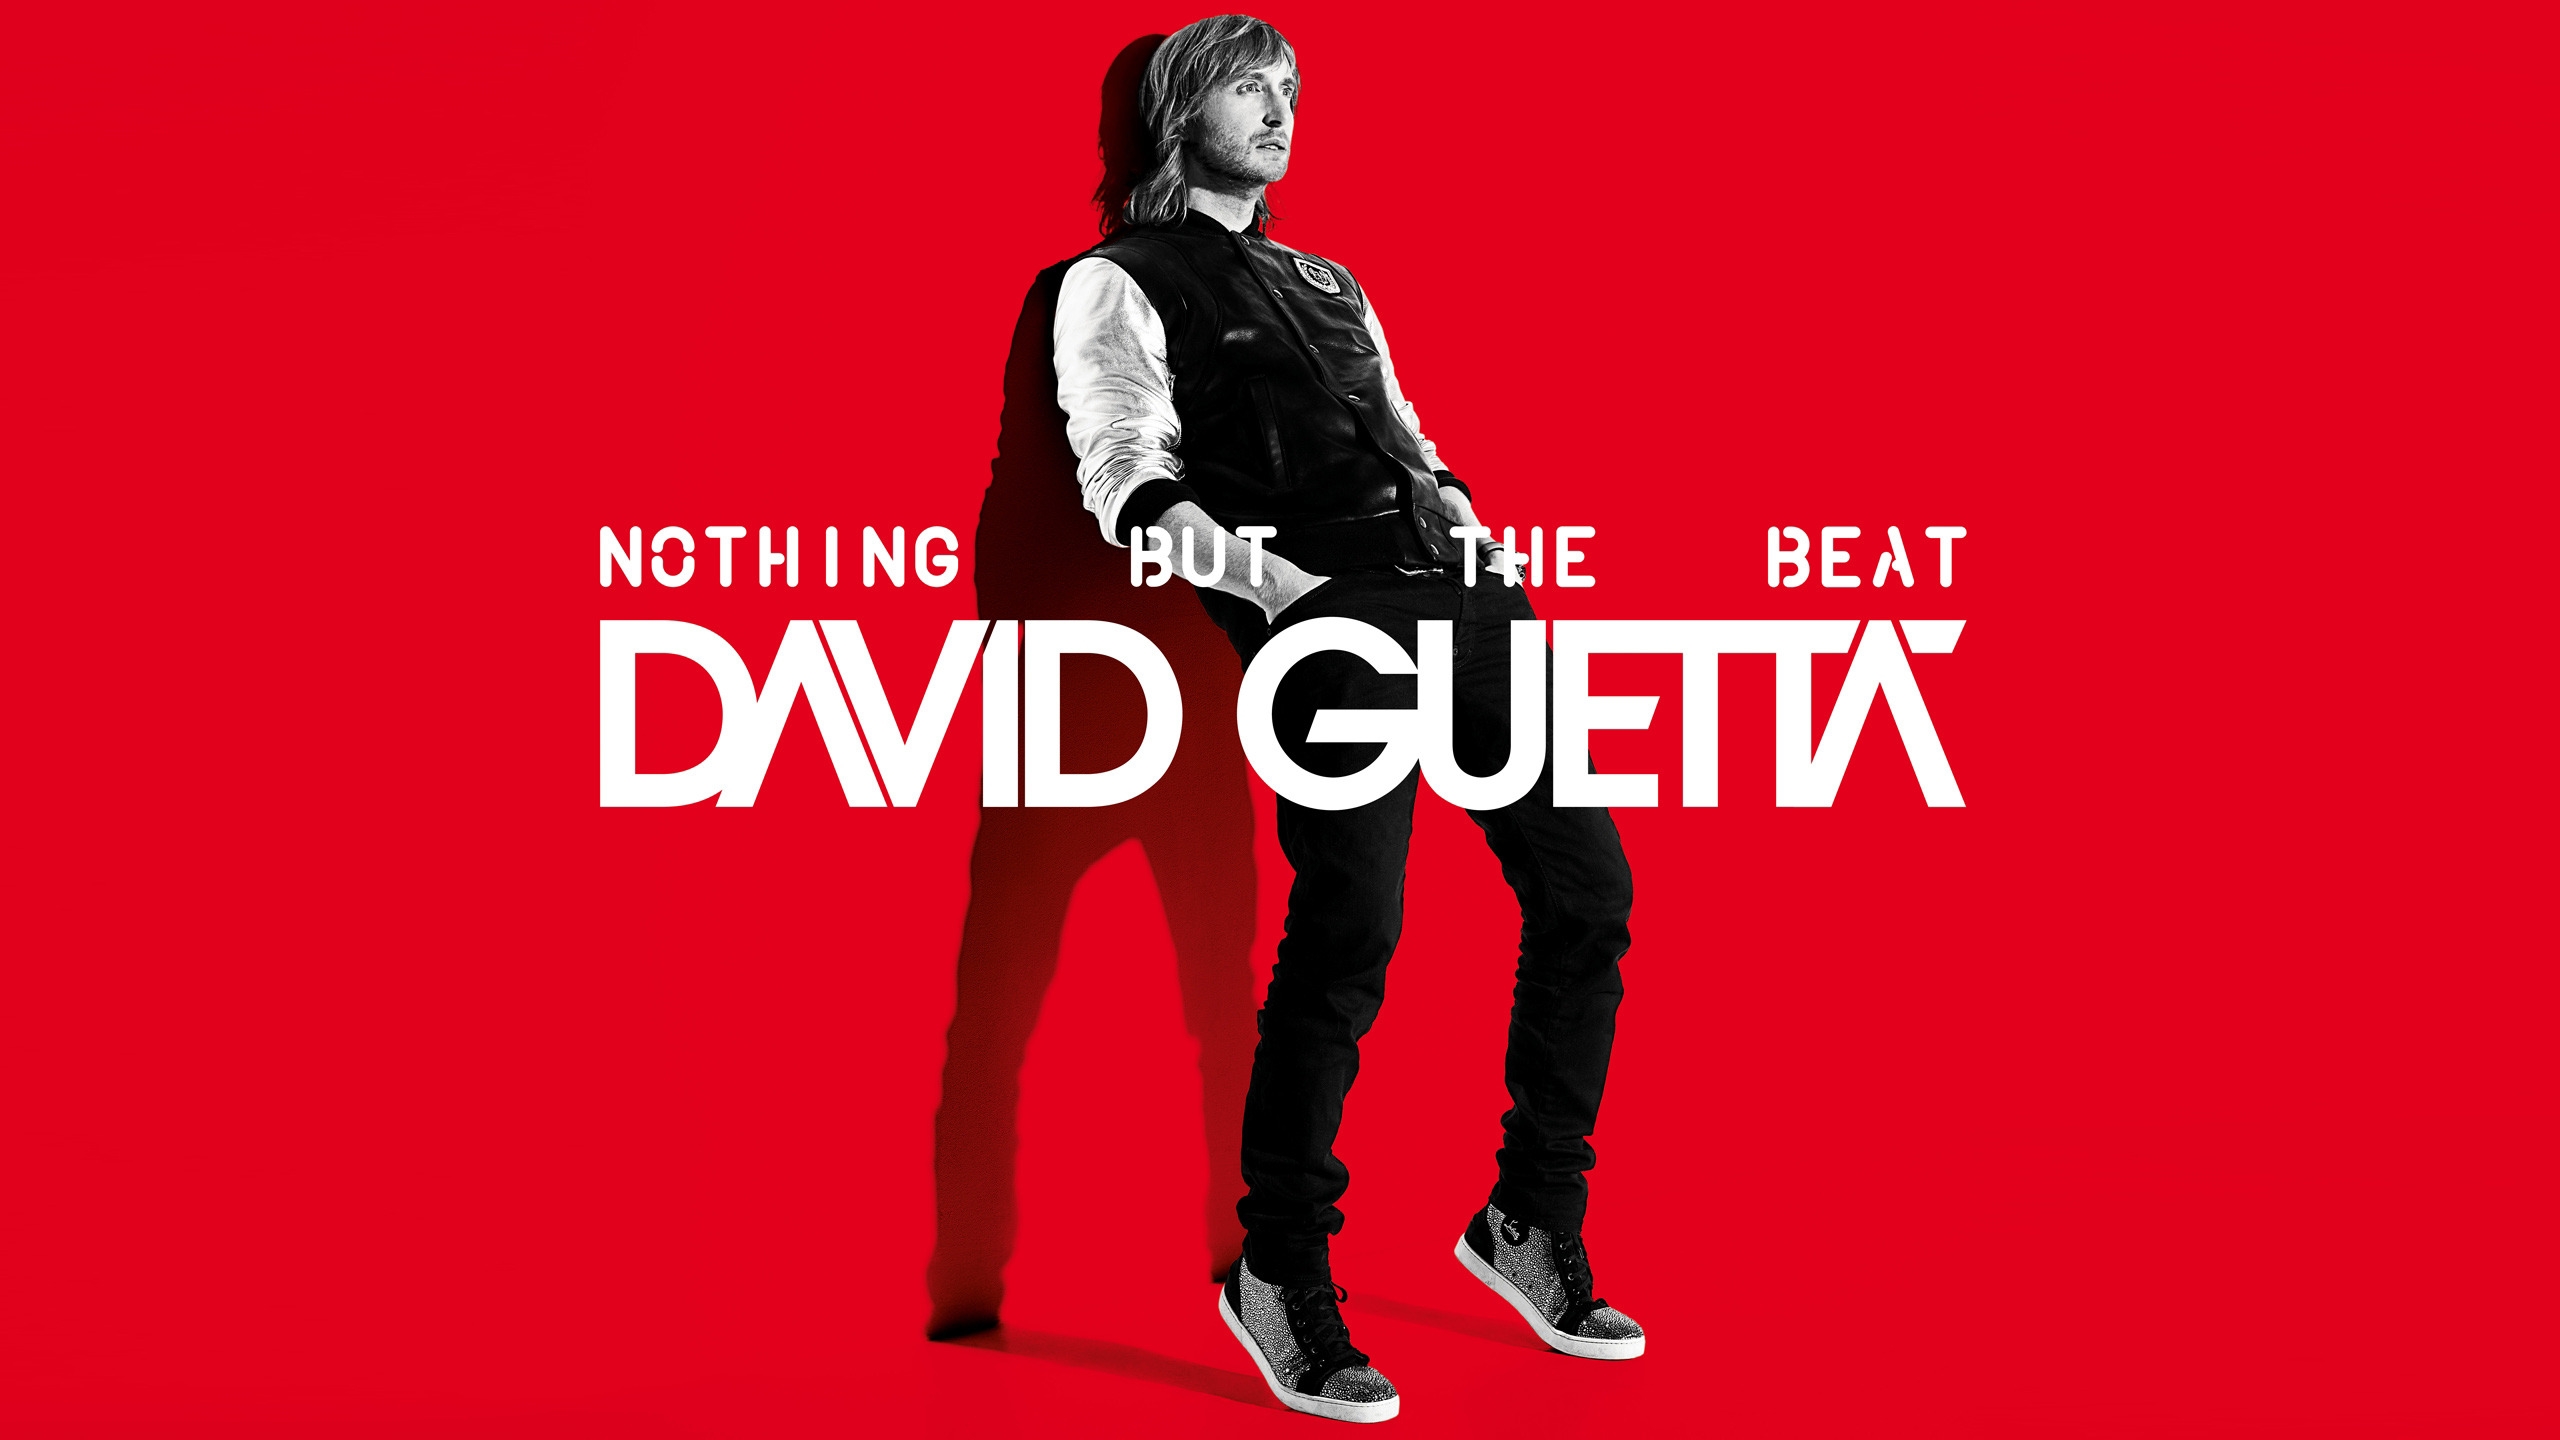 David Guetta Nothing But the Beat for 2560x1440 HDTV resolution